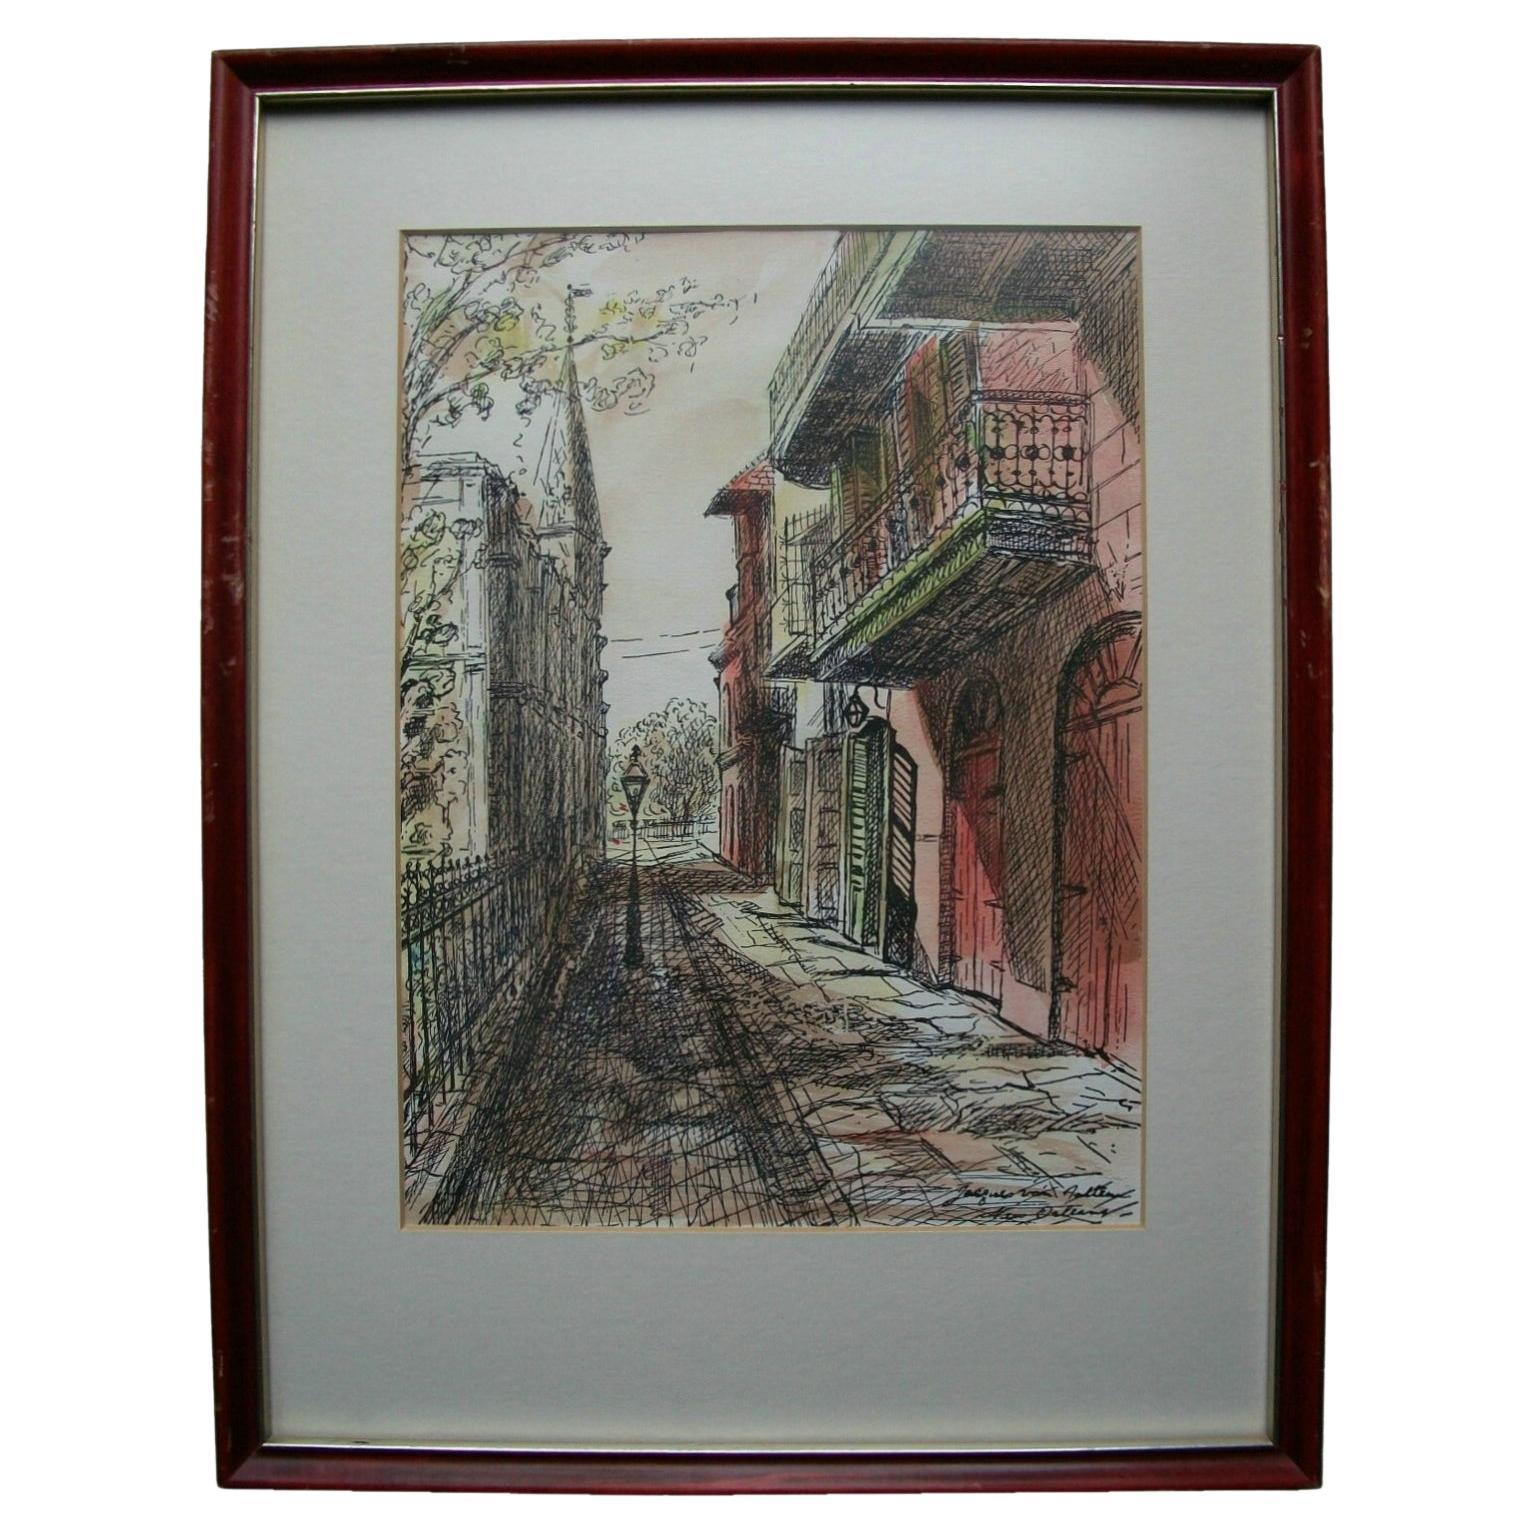 JACQUES VAN AALTEN - New Orleans - Hand Colored Print (1) - Framed - C. 1960's For Sale